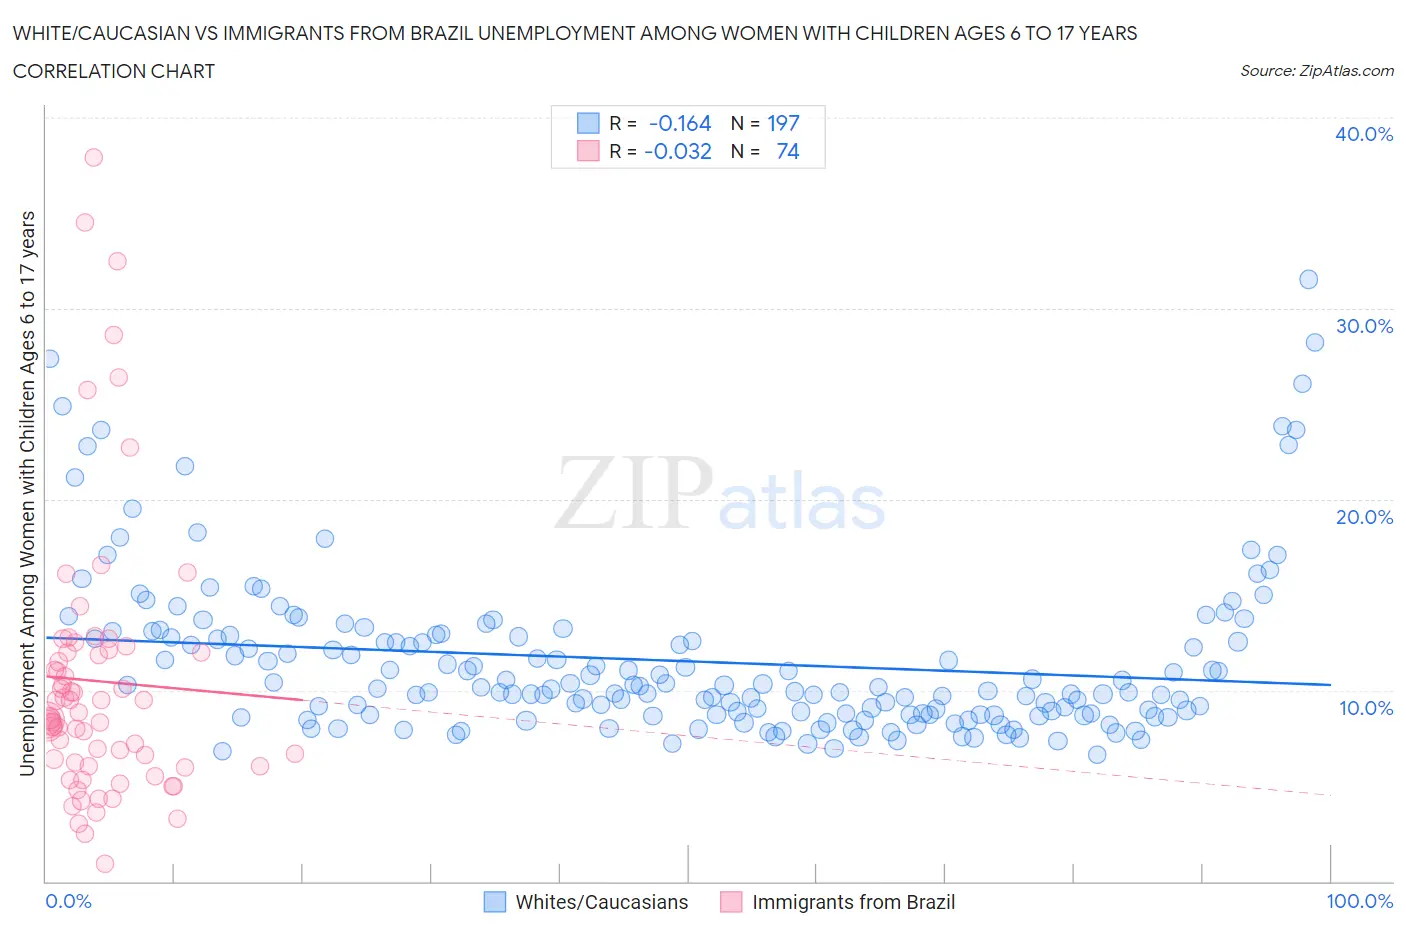 White/Caucasian vs Immigrants from Brazil Unemployment Among Women with Children Ages 6 to 17 years